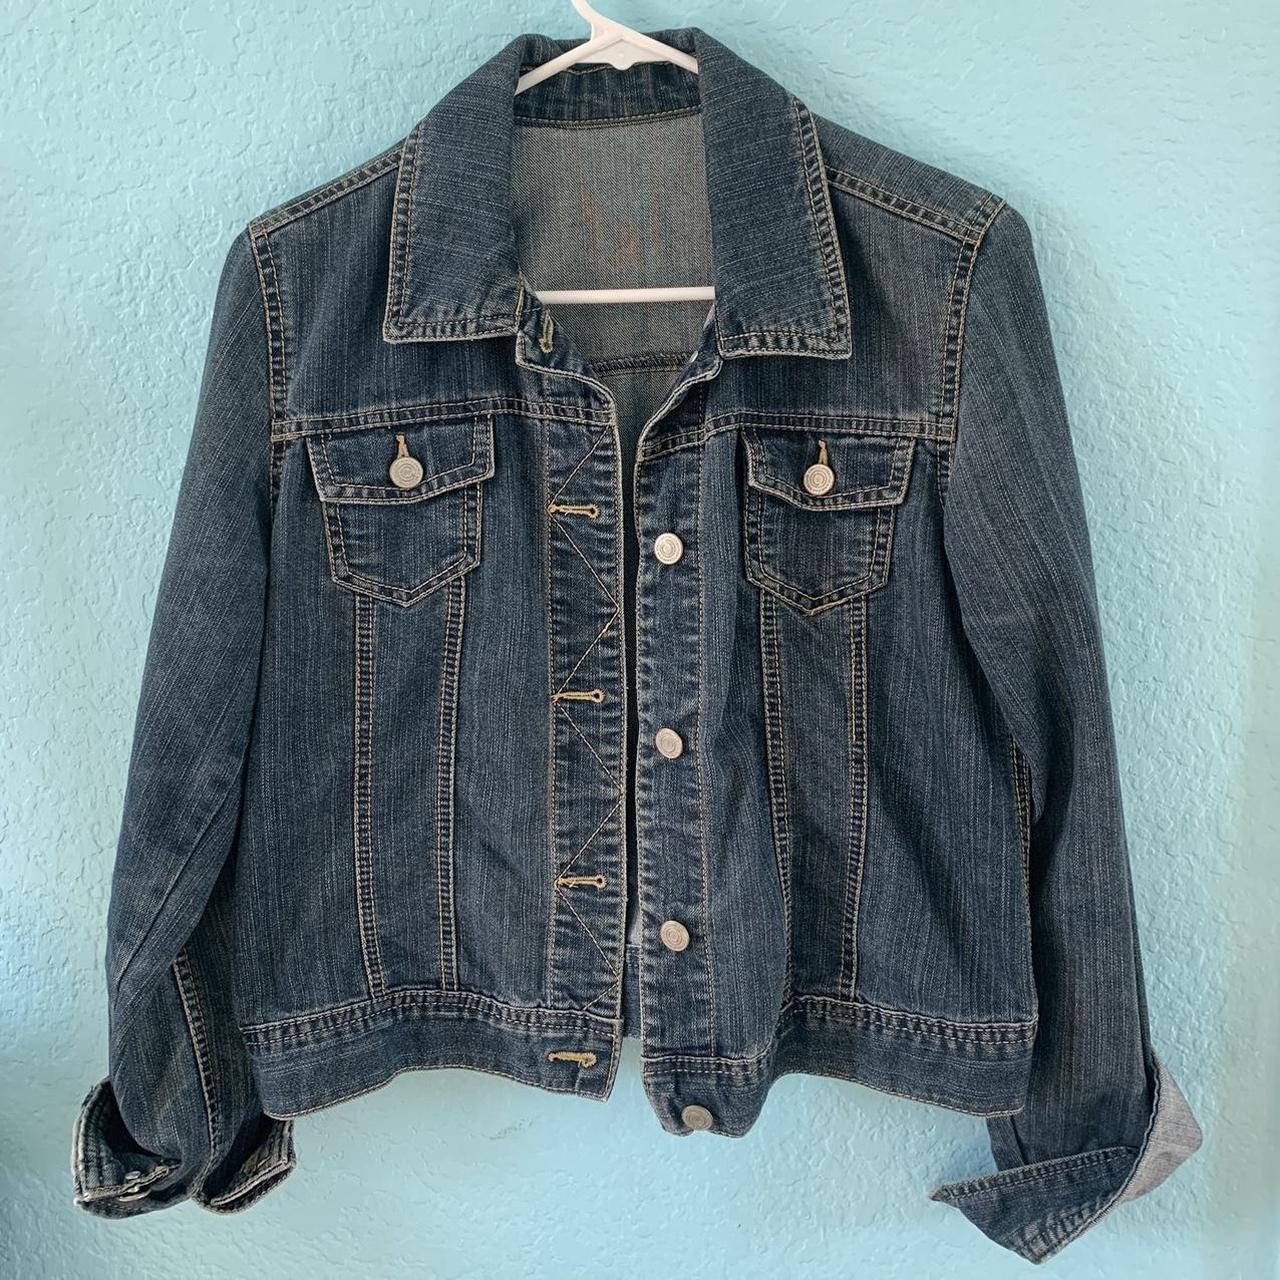 Product Image 2 - Dark denim jacket with silver